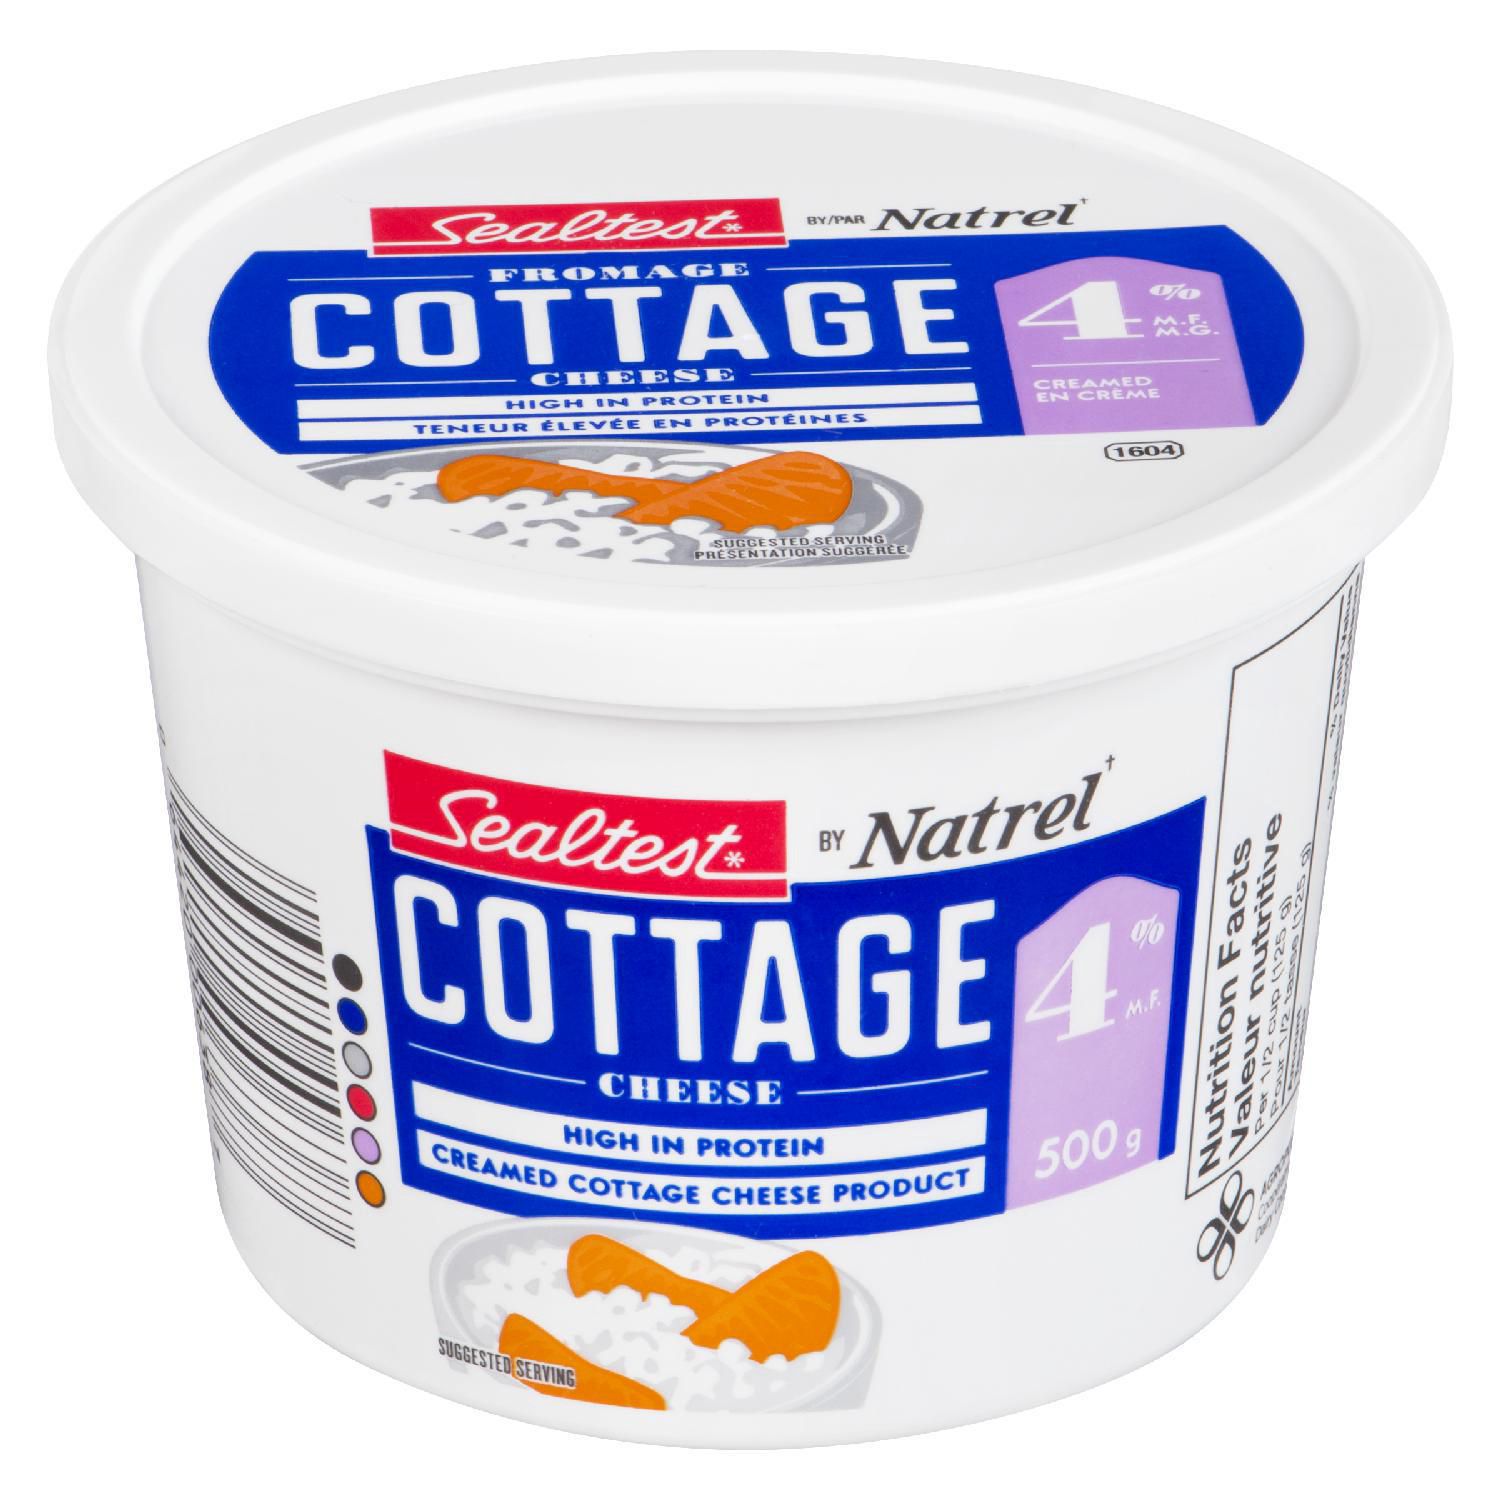 Sealtest By Natrel 4 Cottage Cheese Walmart Canada